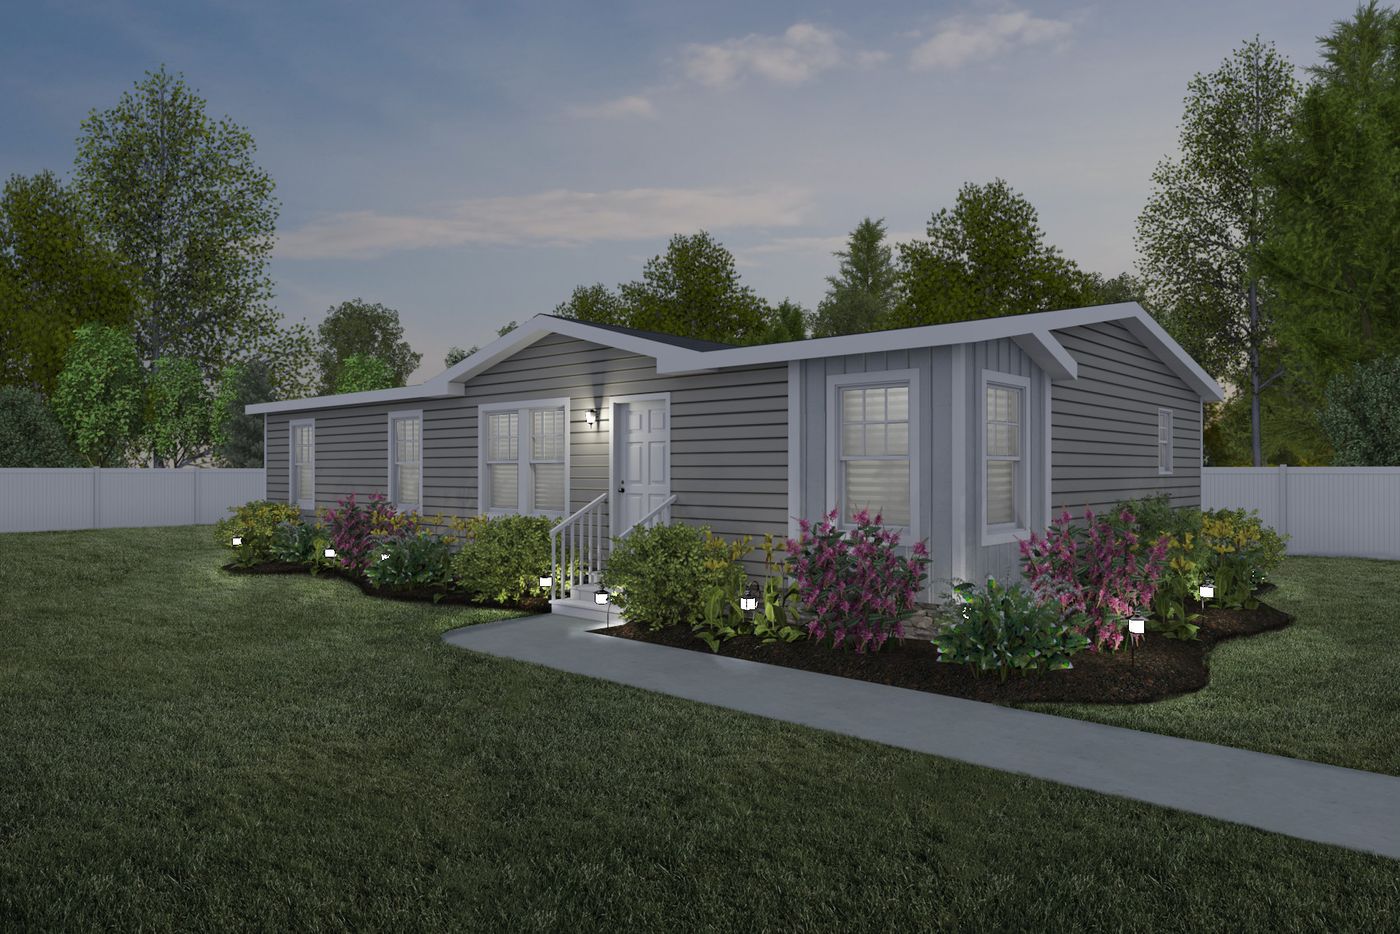 The MEADOW RD 5228-MS016 SECT Exterior. This Manufactured Mobile Home features 3 bedrooms and 2 baths.